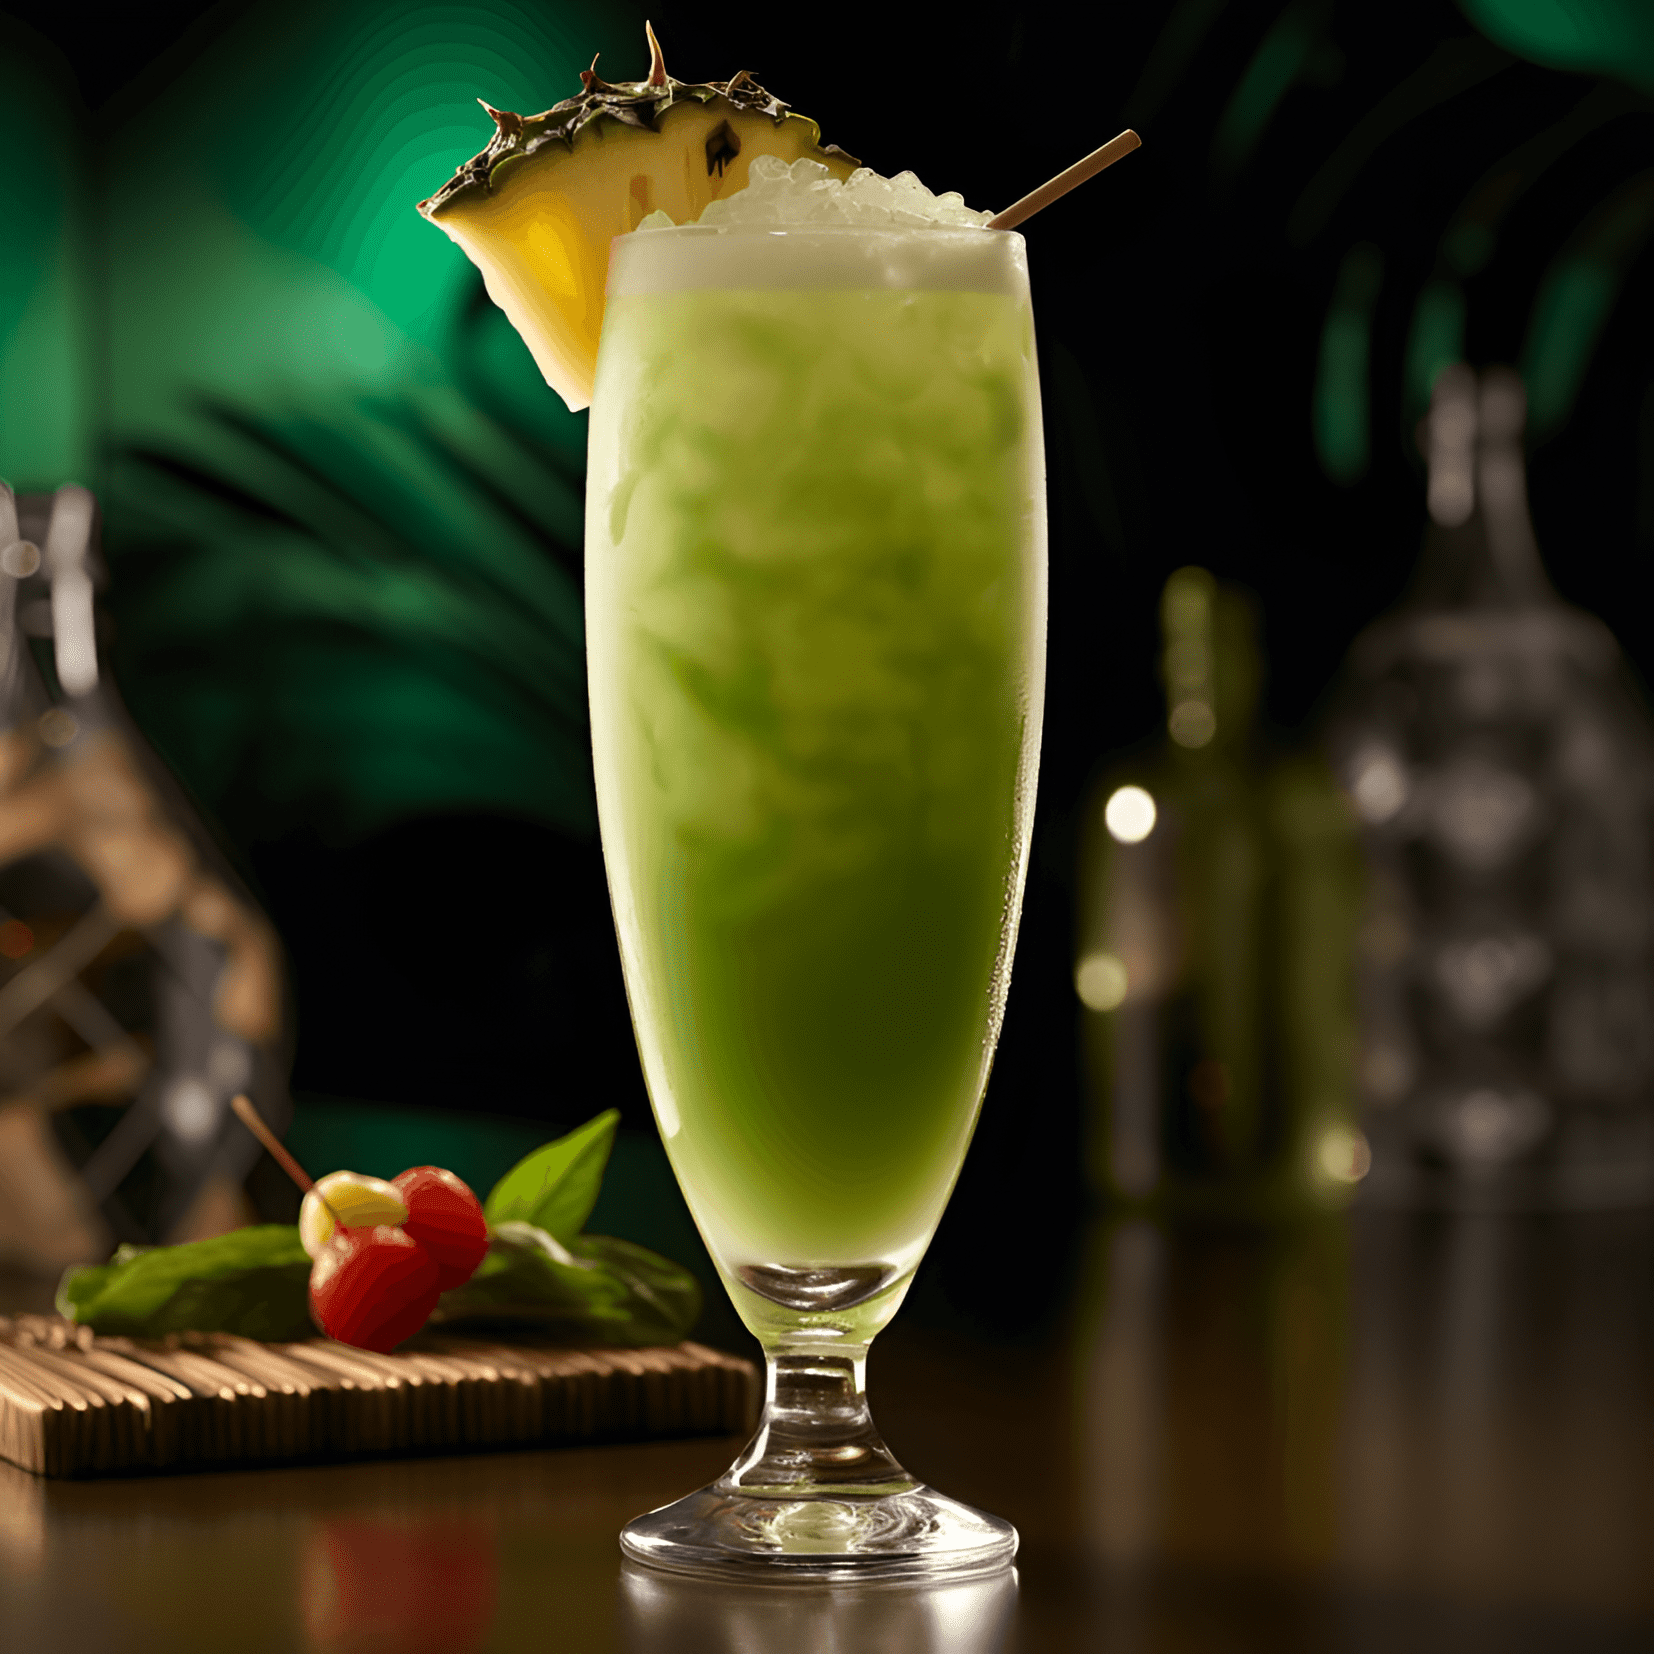 Kiwi Colada Cocktail Recipe - The Kiwi Colada is a sweet, tangy, and refreshing cocktail with a creamy texture. The combination of kiwi, pineapple, and coconut creates a harmonious blend of tropical flavors, while the rum adds a subtle warmth to the drink.